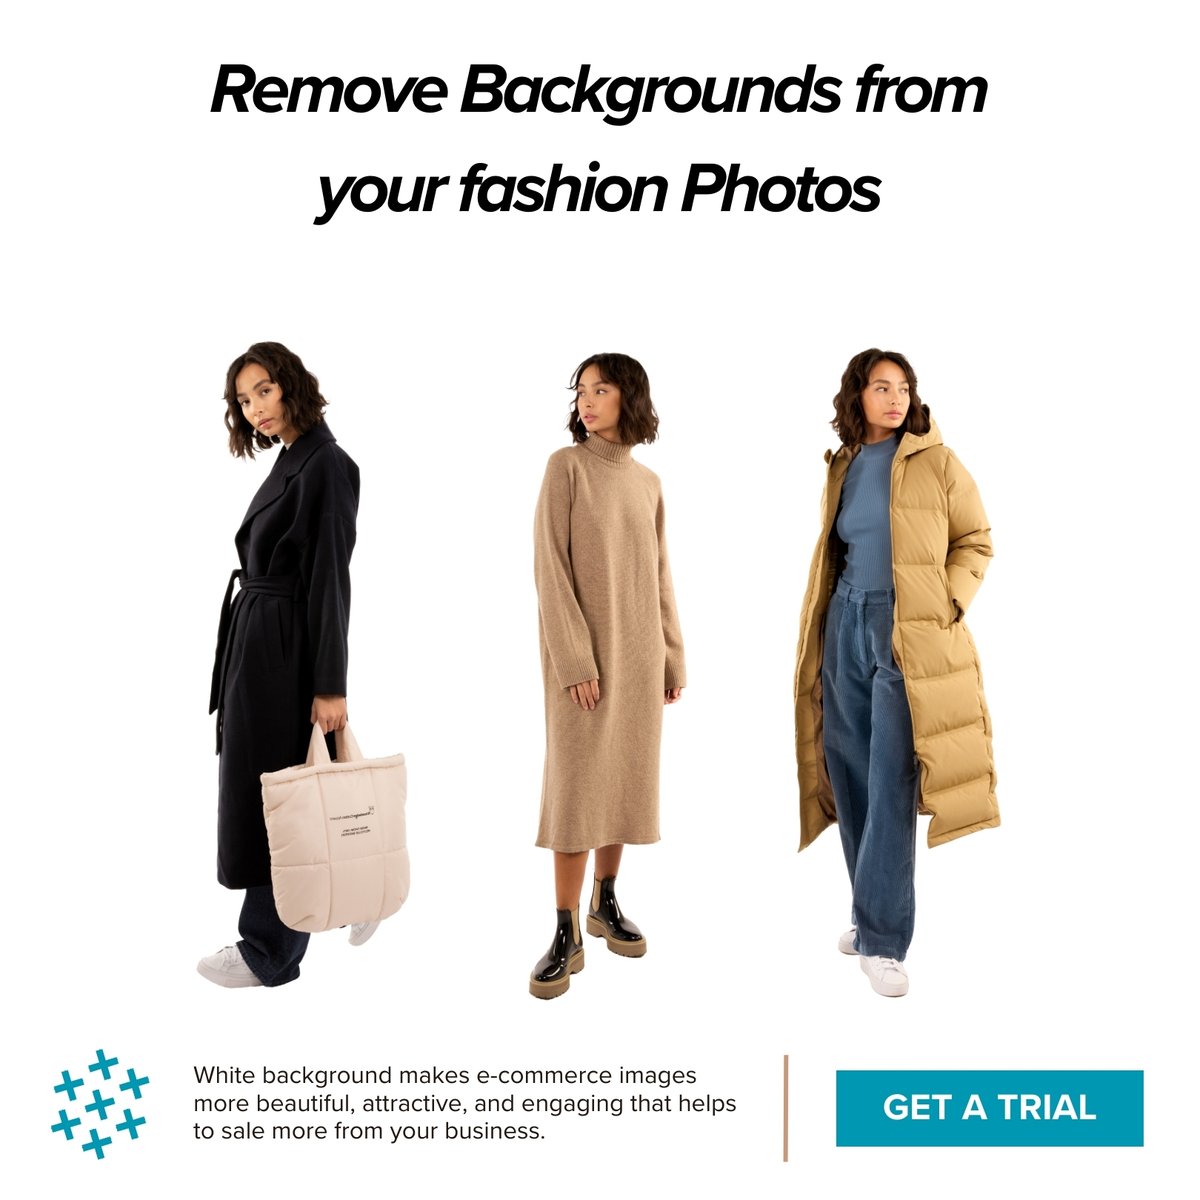 👗 Struggling with background distractions in your fashion photos? Say goodbye to cluttered backgrounds and hello to seamless elegance with our expert background removal service. 

Get a free trial now to get started clippingsolutions.com

#FashionPhotography #BackgroundRemoval